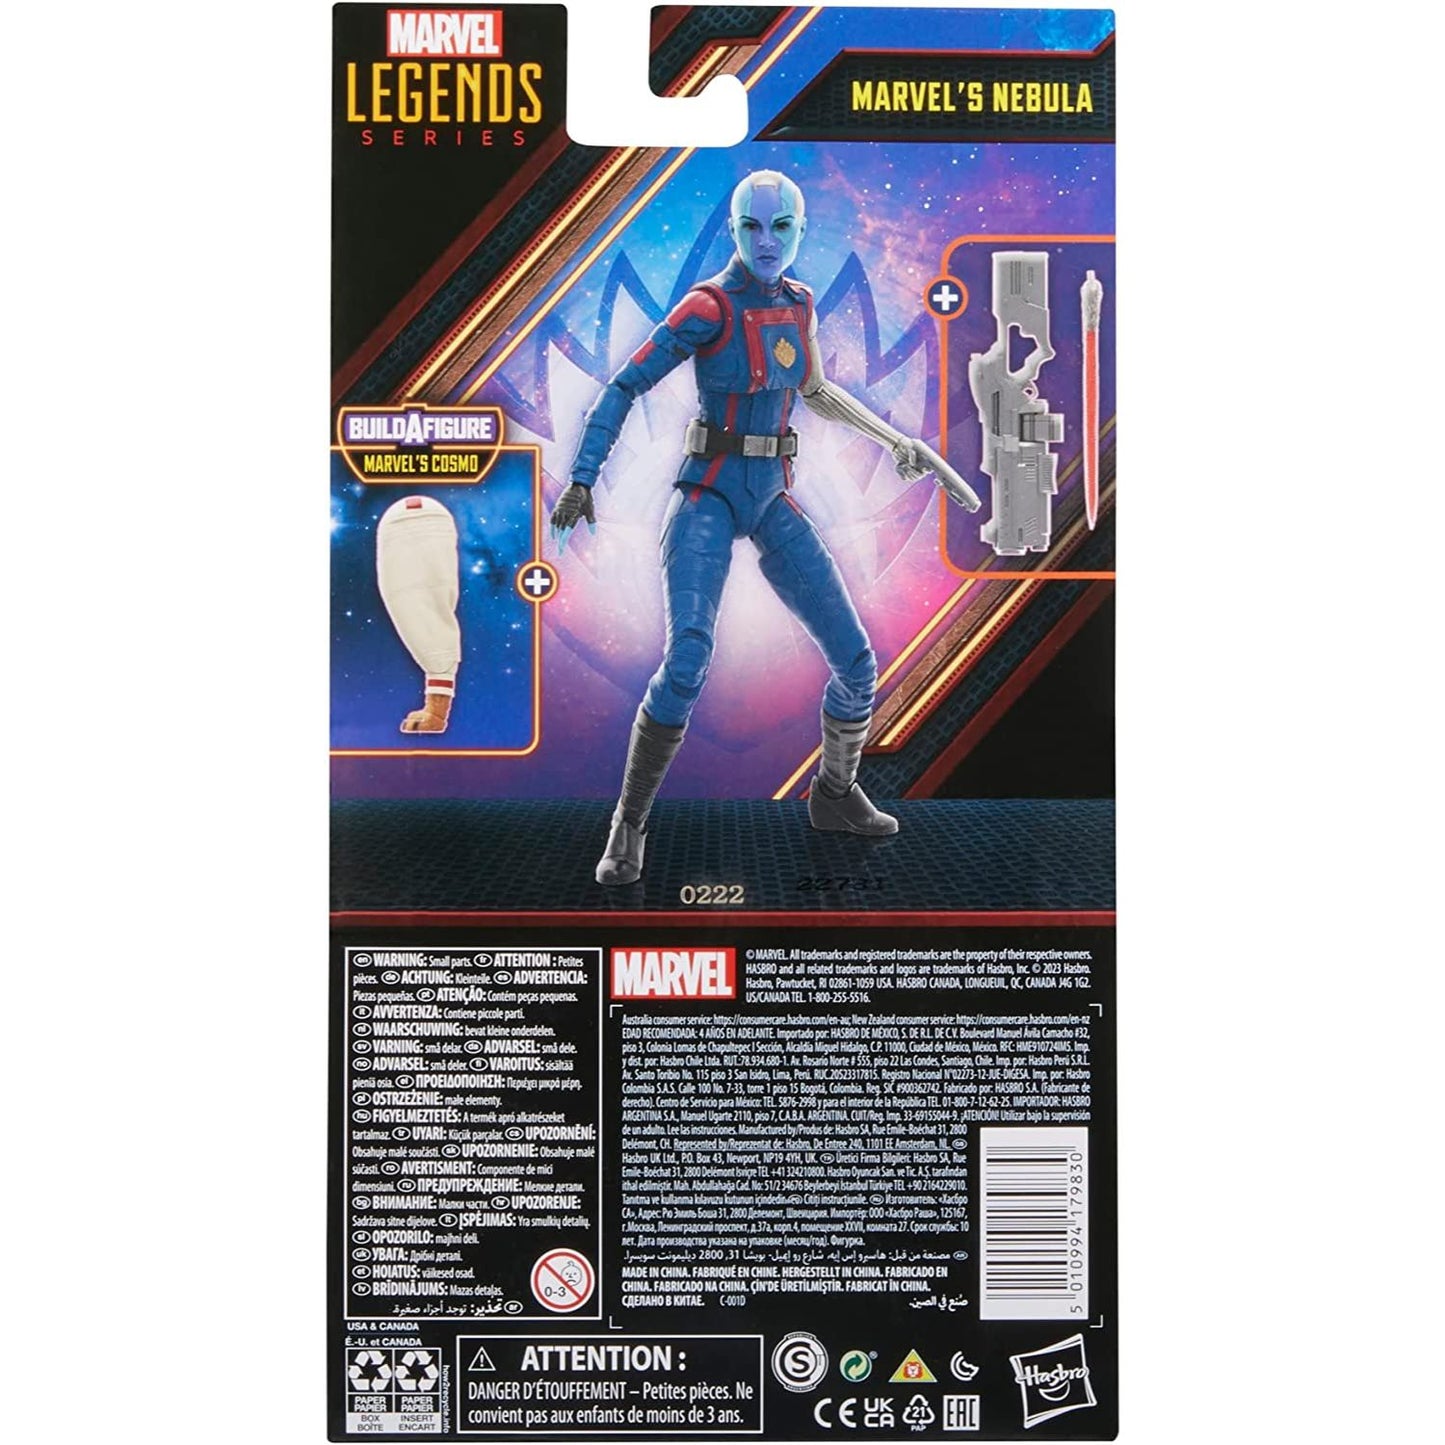  Guardians of the Galaxy Vol. 3 Marvel Legends Nebula 6-Inch Action Figure Toy box back view - Heretoserveyou